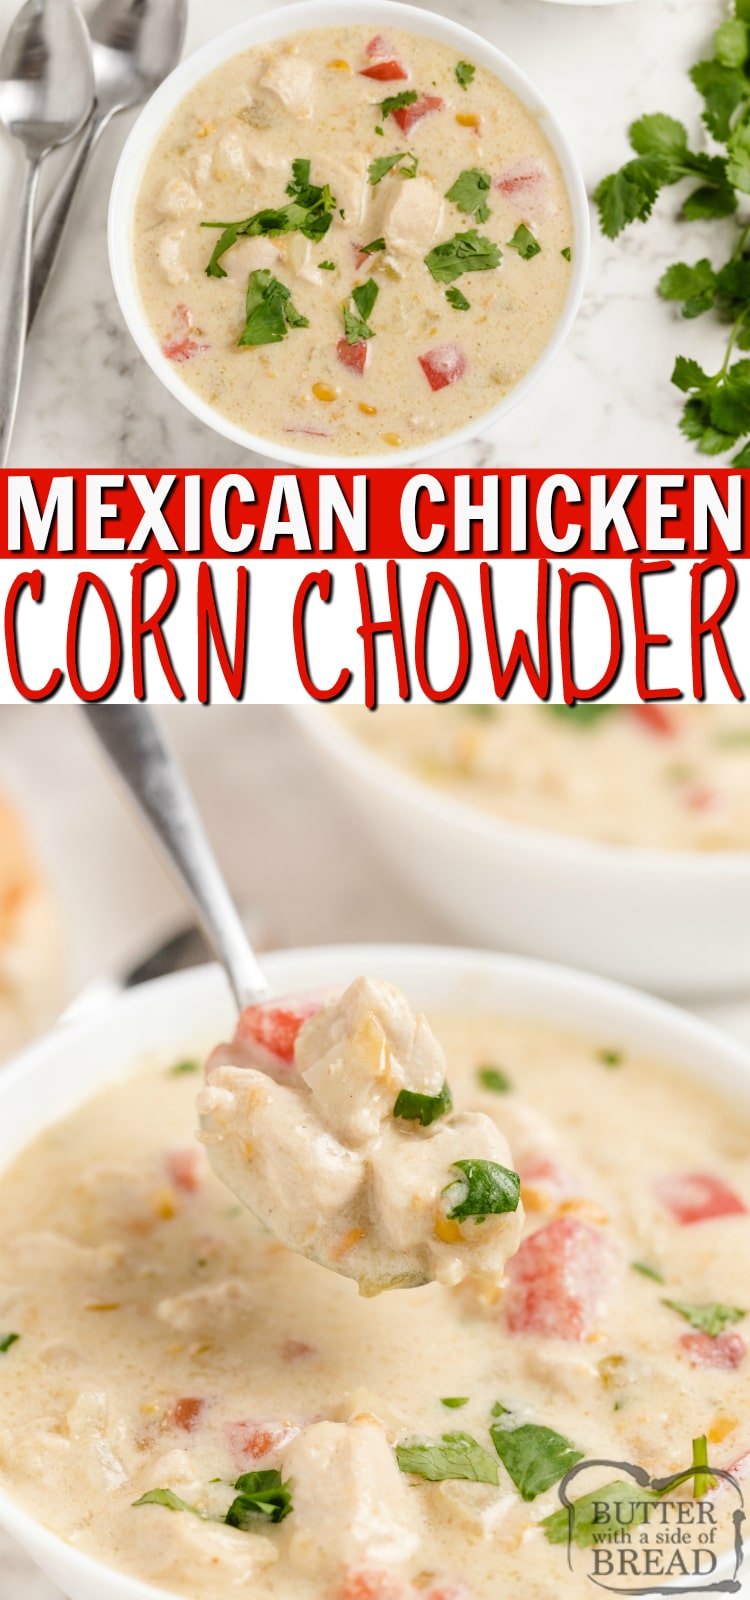 Mexican Chicken Corn Chowder is a simple corn chowder recipe with a southwestern twist. Lots of flavor in a delicious soup recipe that can be made in less than 30 minutes. 